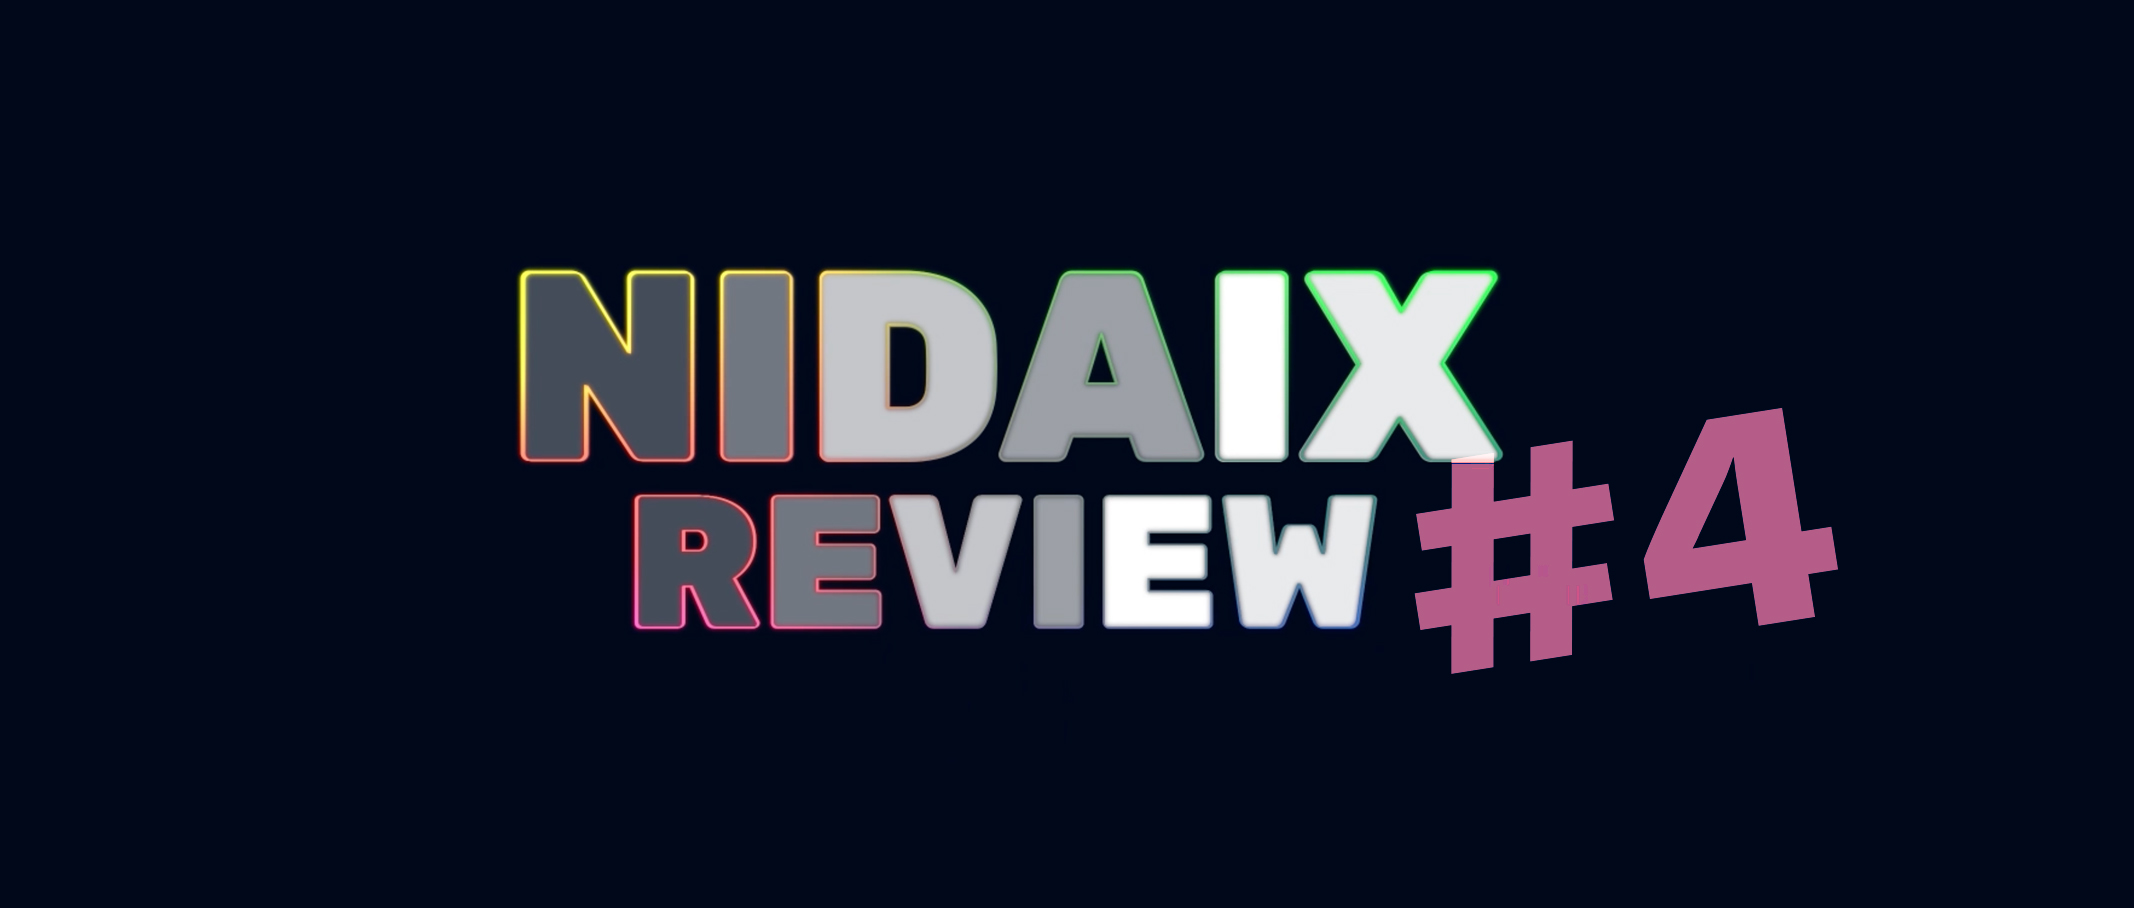 NIDAIX REVIEW #4